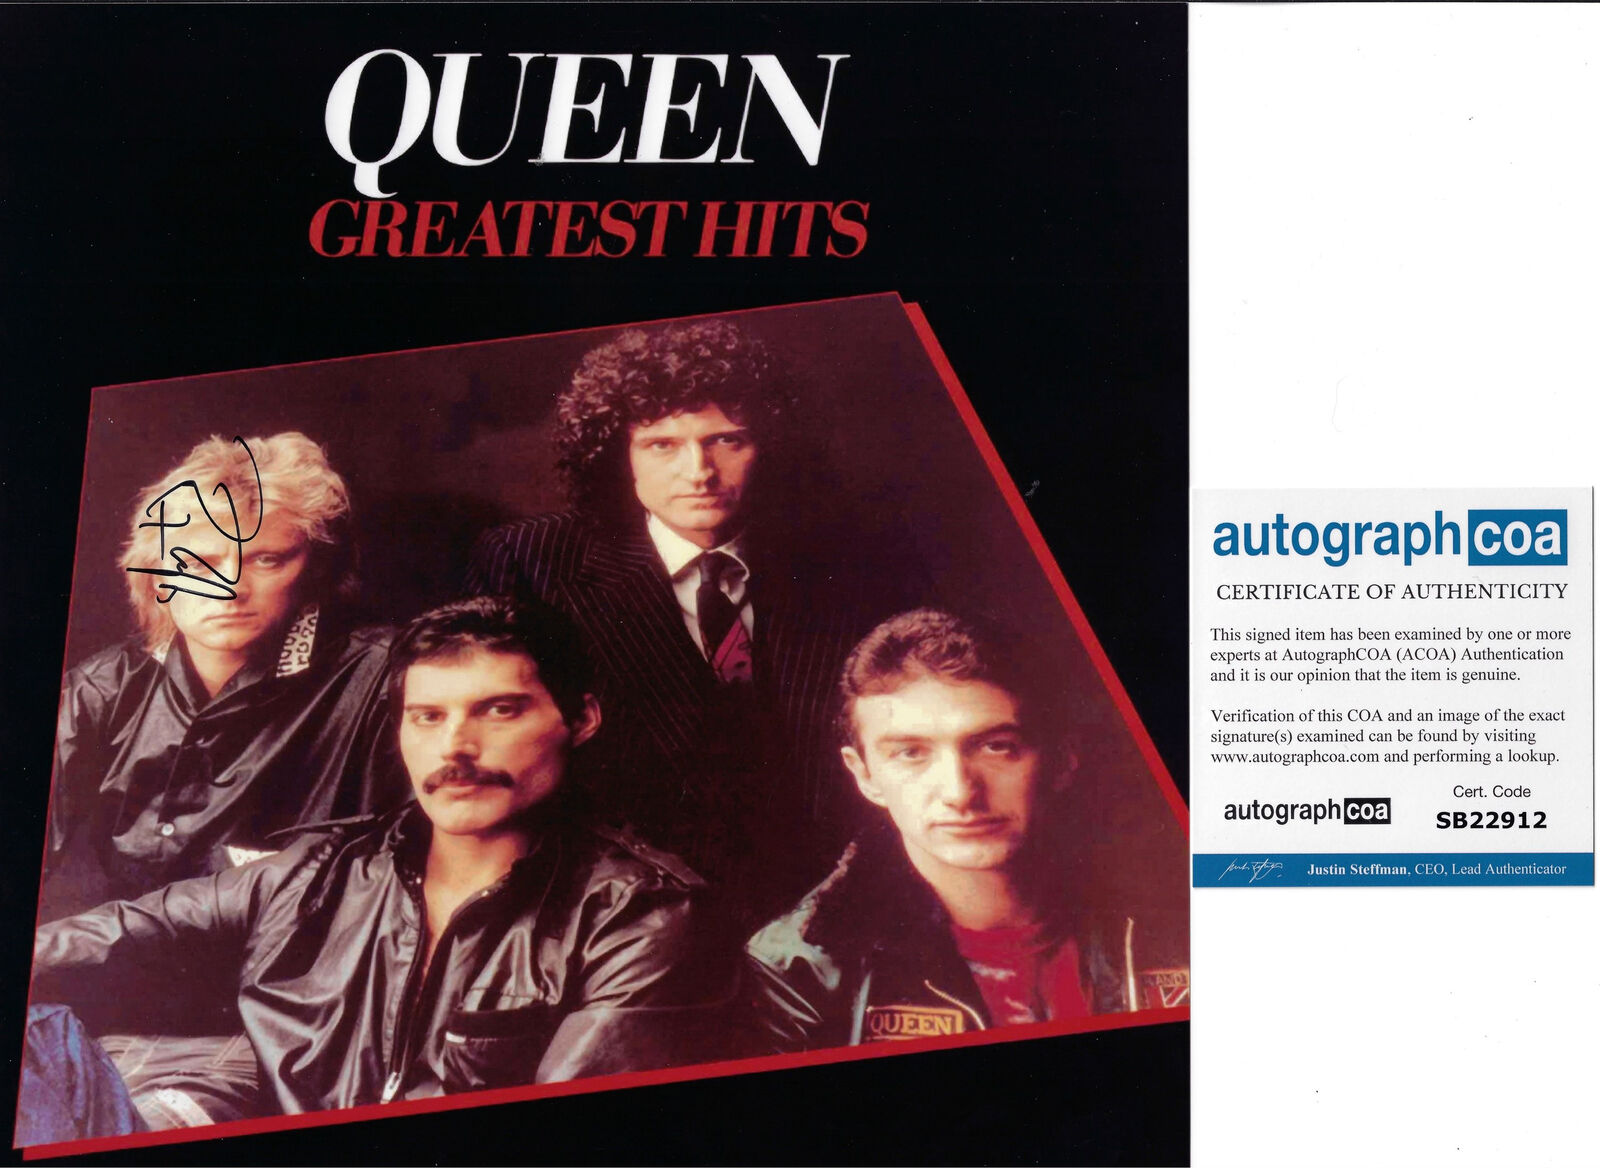 ROGER TAYLOR SIGNED 12X12 PHOTOGRAPH QUEEN GREATEST HITS COVER (ACOA RACC COA)